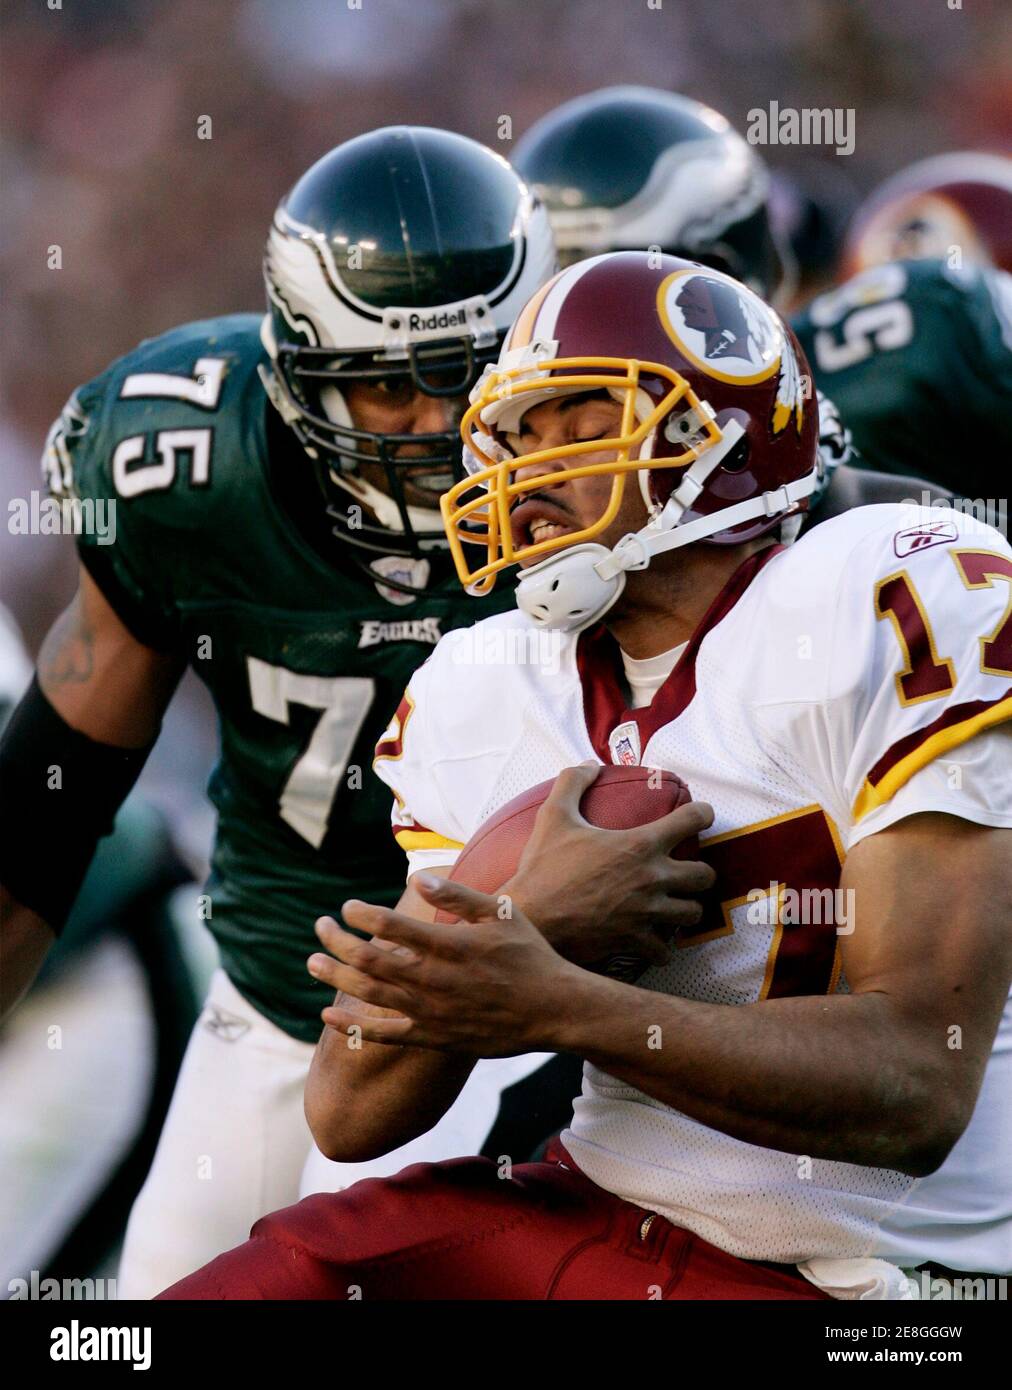 Washington Redskins quarterback Jason Campbell (R) is sacked by Philadelphia Eagles defensive end Juqua Thomas (75) in the first half of their NFL football game in Landover, Maryland December 10, 2006.      REUTERS/Gary Cameron  (UNITED STATES) Stock Photo